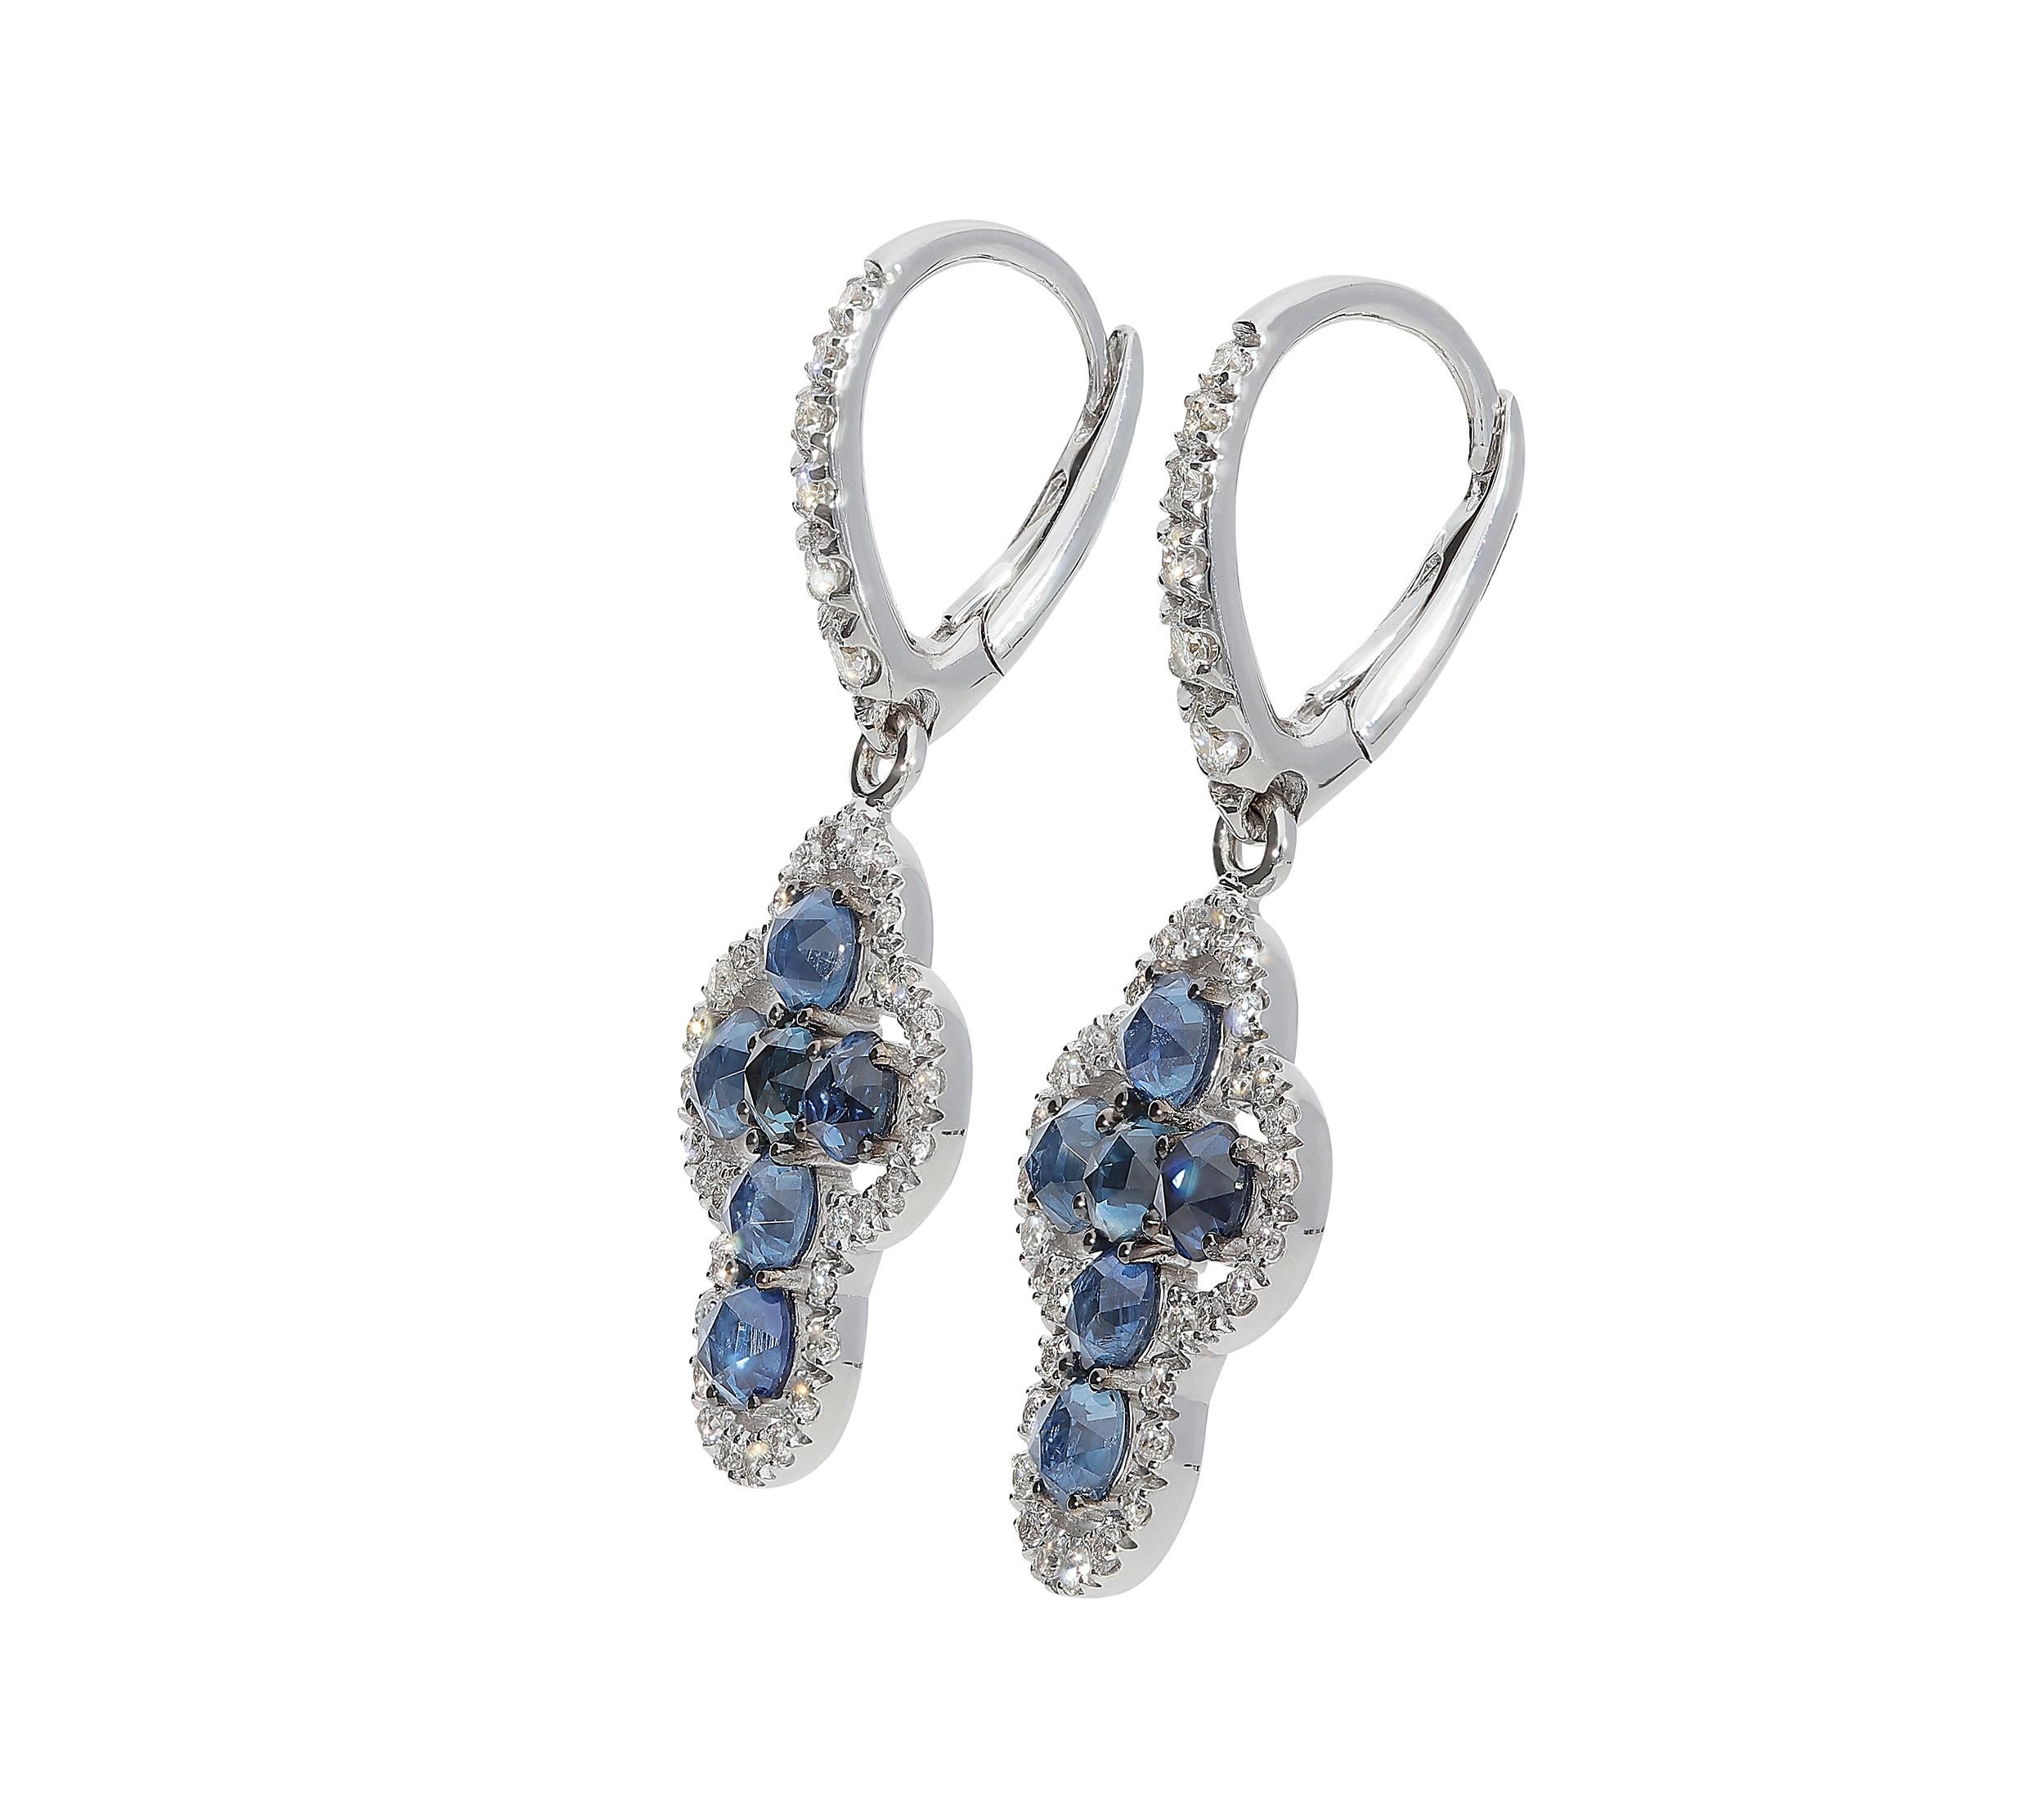 Rose cut blue sapphires for 1,58 carats and white round brilliant diamonds color G clarity VS for 0,49 carat set on these dangle earrings. The weight of 18kt white gold is 4,10 grams and the total length is 2,80 centimeters and the width is 1,20